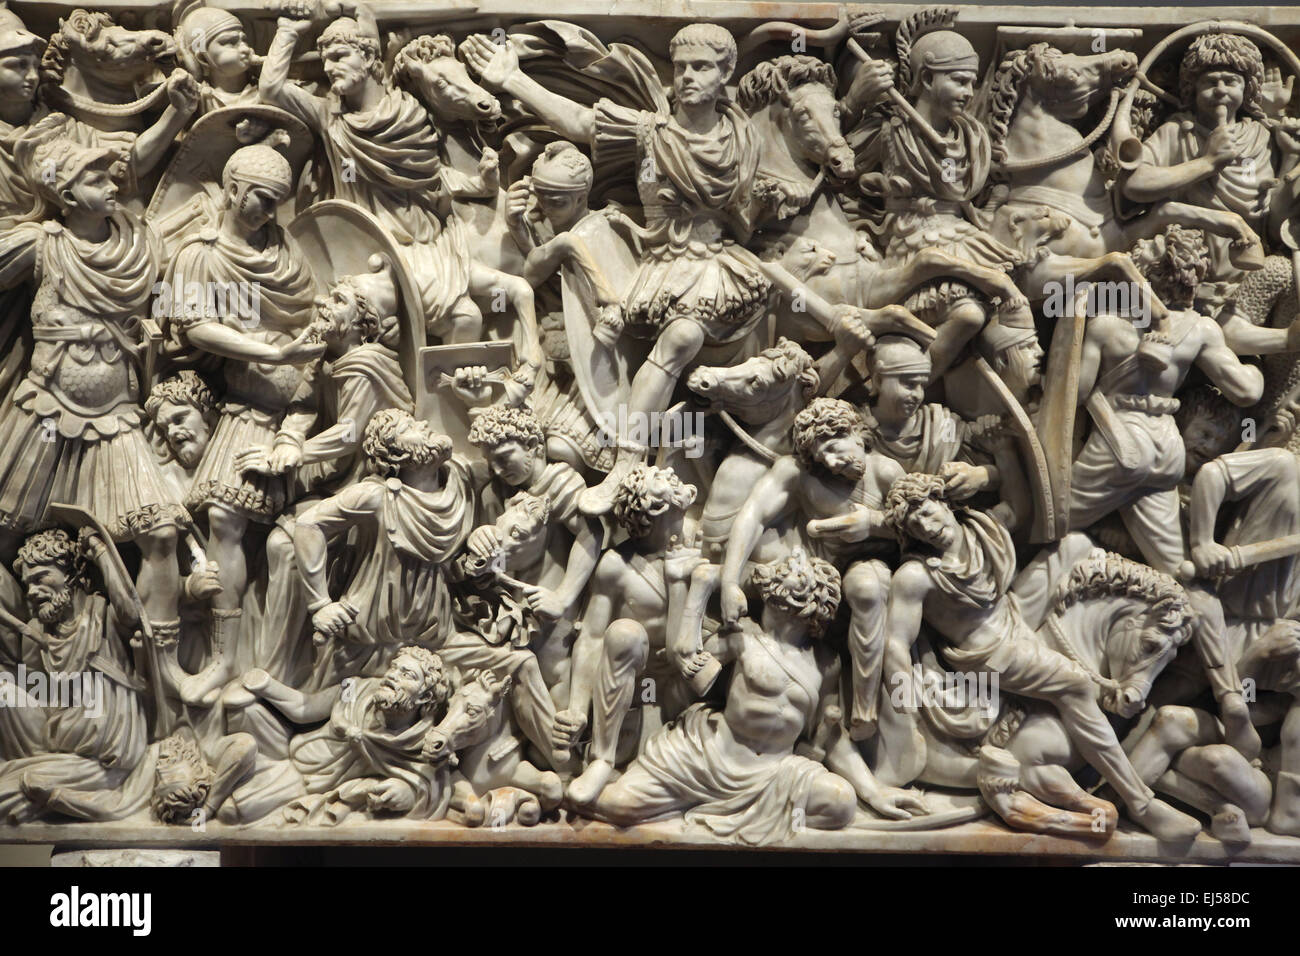 Great Ludovisi Sarcophagus. Roman sarcophagus from around 250-260 AD. National Roman Museum, Palazzo Altemps, Rome, Italy. Battle between Romans and Barbarians is depicted in the front panel of the sarcophagus from a tomb near the Porta Tiburtina. Stock Photo